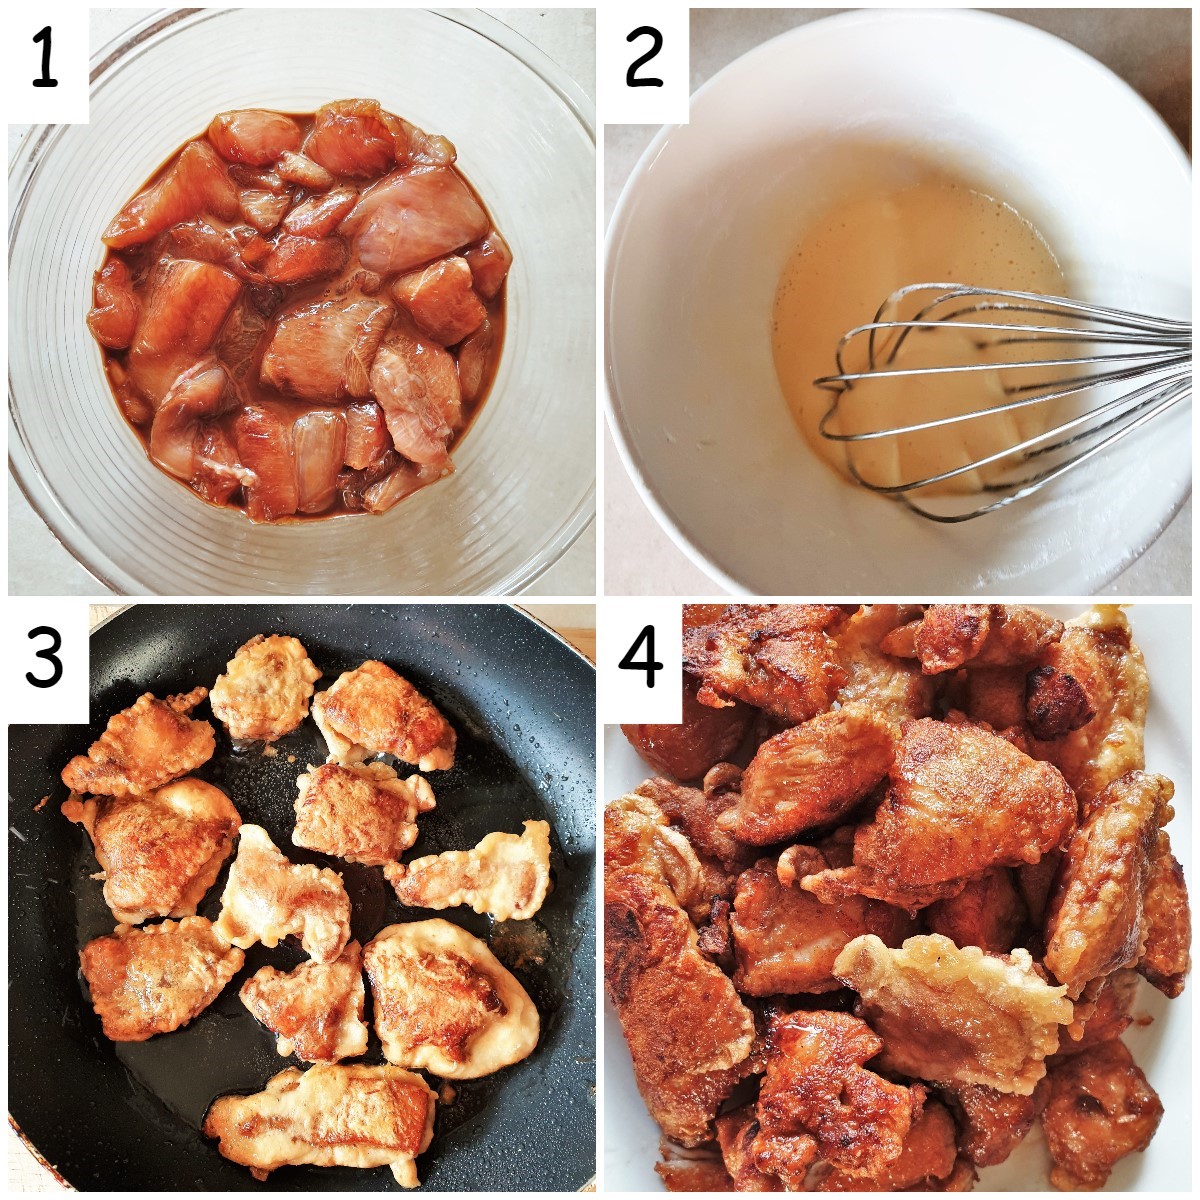 A collage of 4 images showing the steps for marinating and frying the chicken.